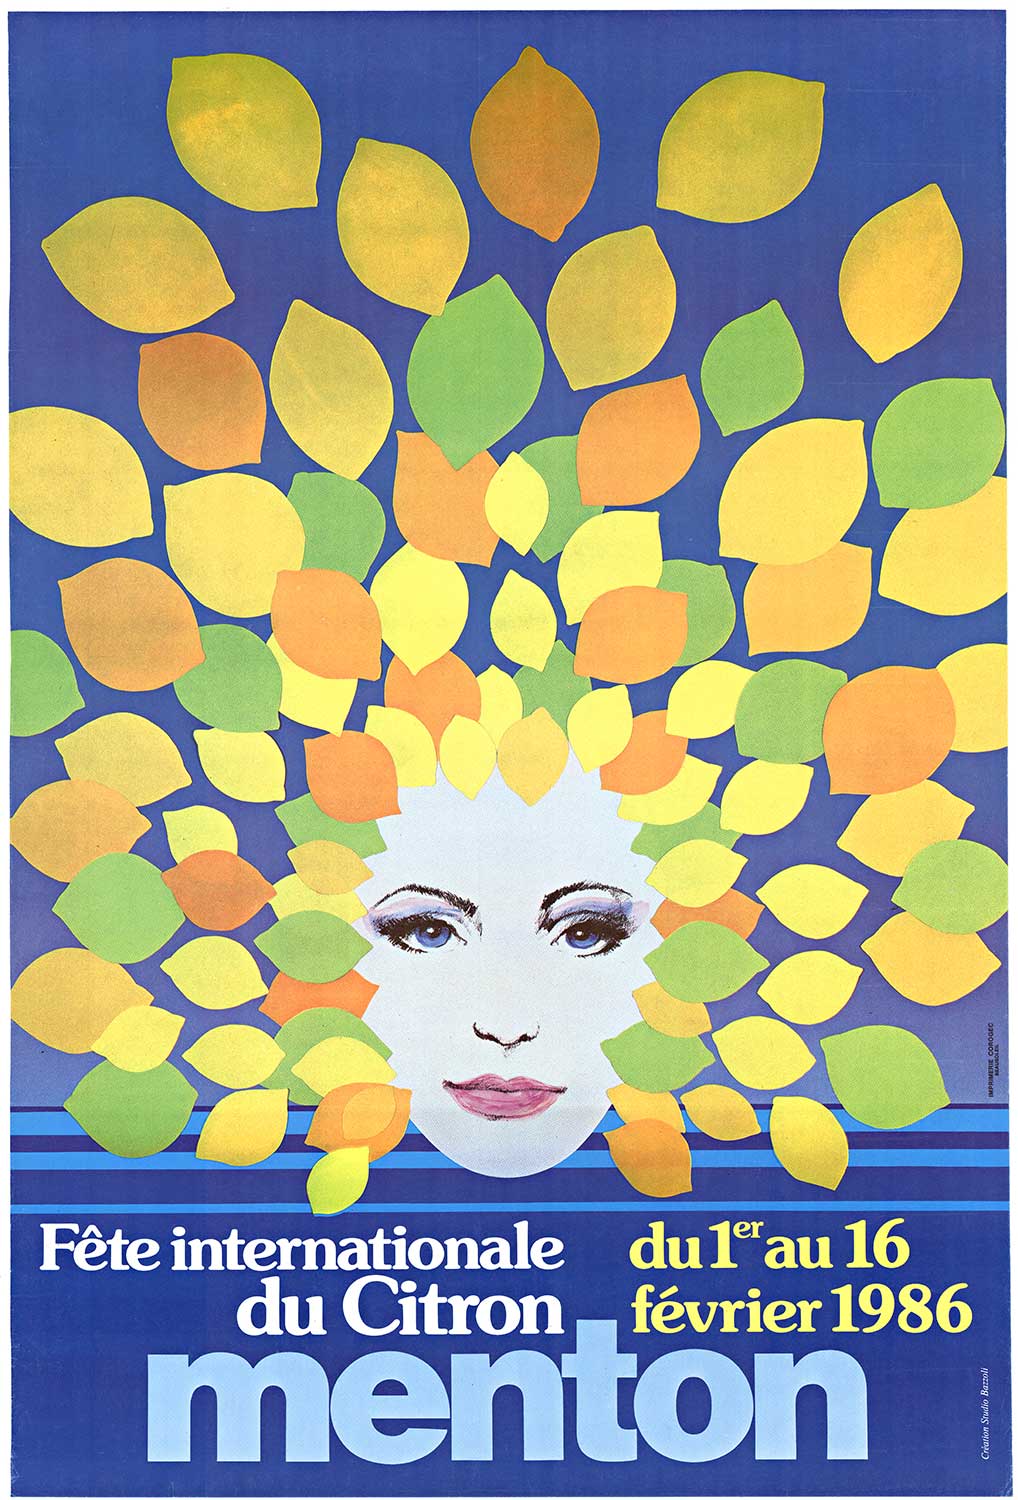 Original Menton Fete Internationale du Citron (Menton International Lemon Festival). Archival linen backed in very good condition, A-, and ready to frame. The art group that created this poster is Studio Bazzoli. Printer: Imprimerie Corogec.